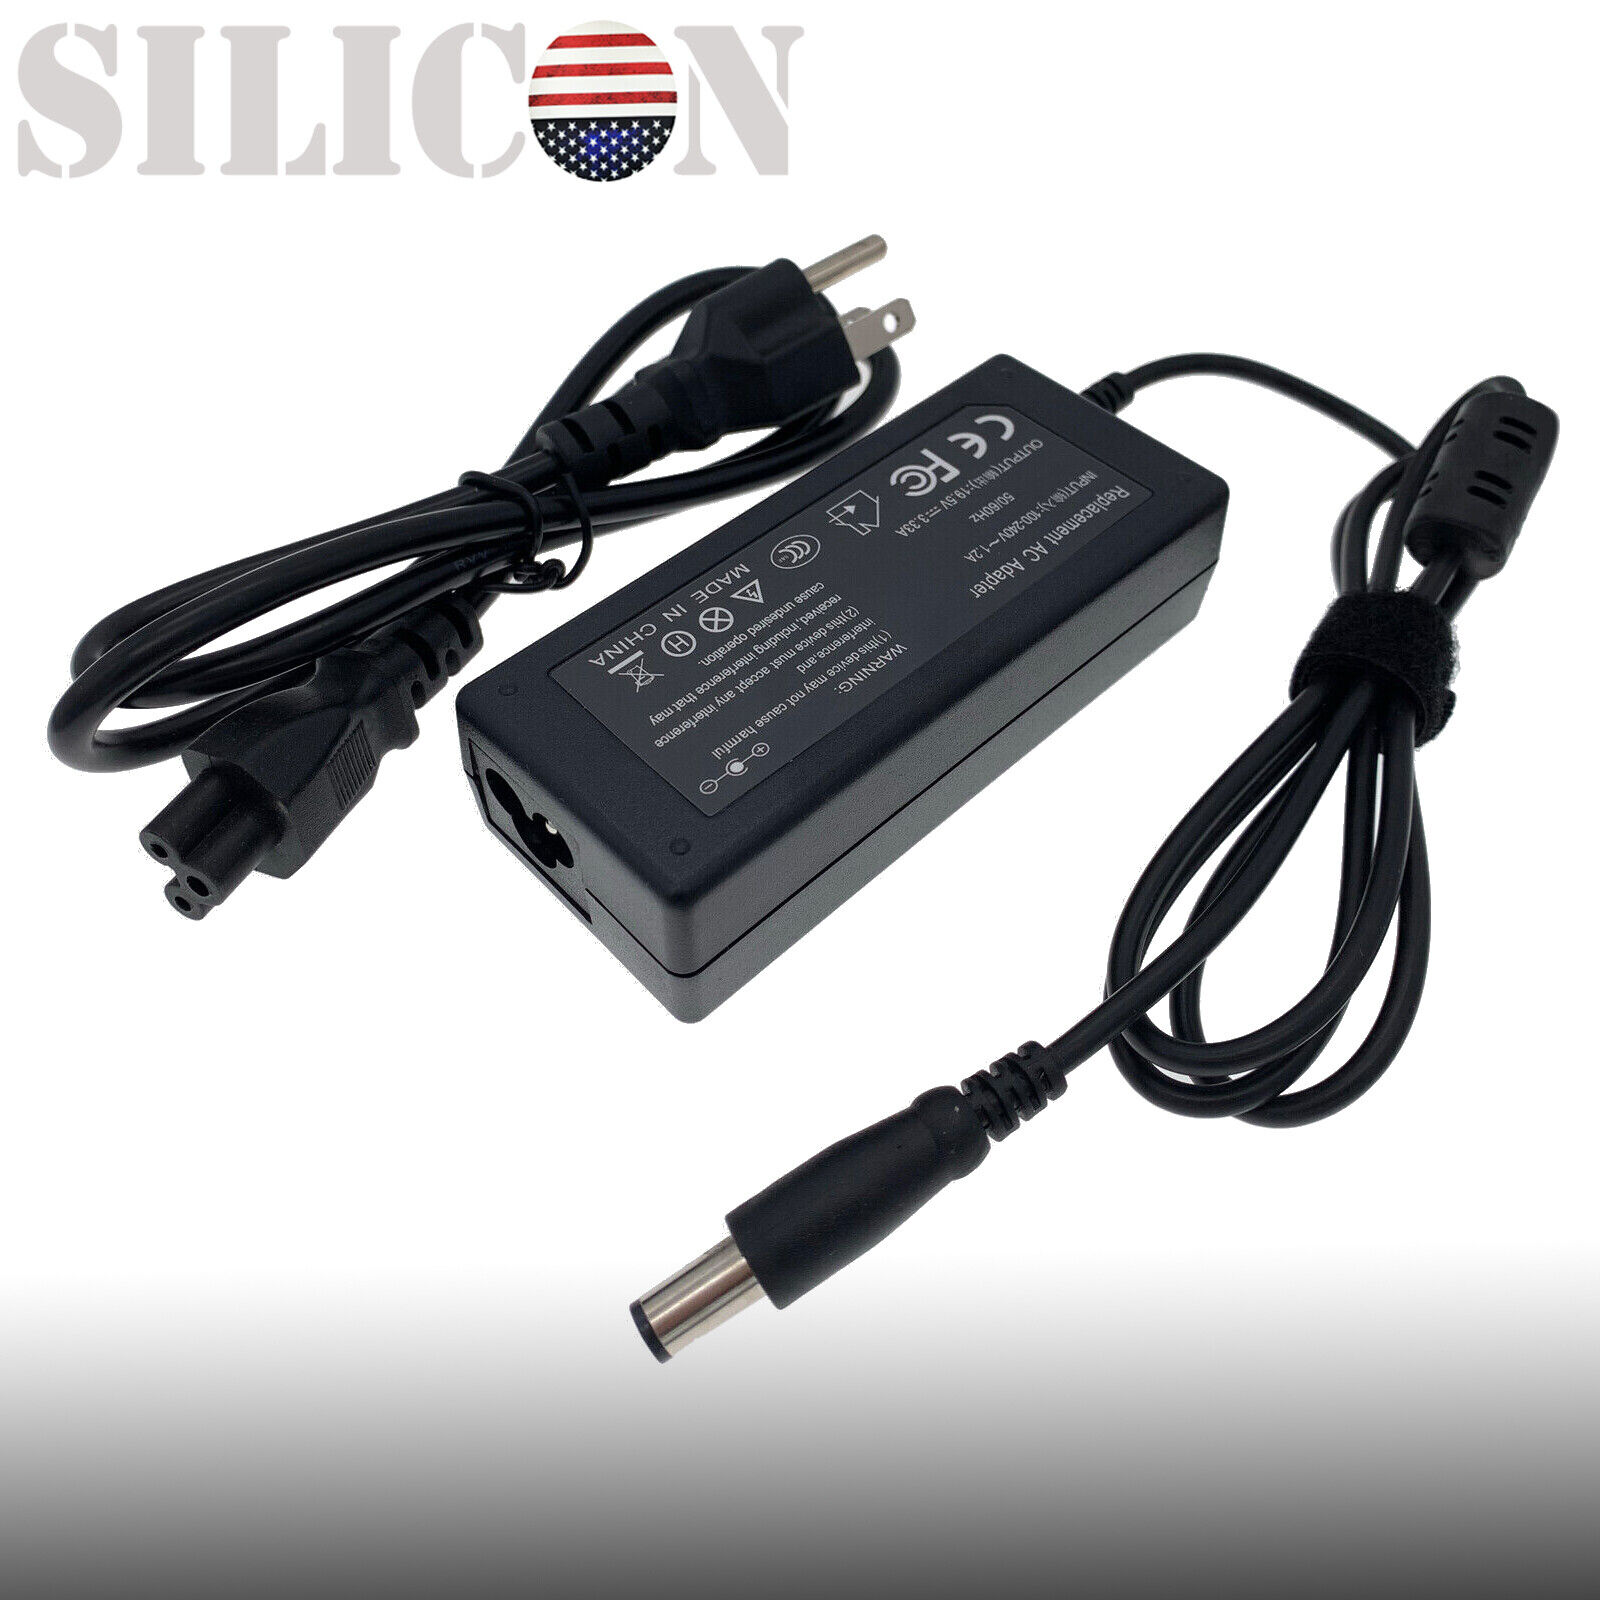 New AC Adapter Charger For HP Probook 640-G1, 645-G1, 650-G1, 655-G1 Power Cord